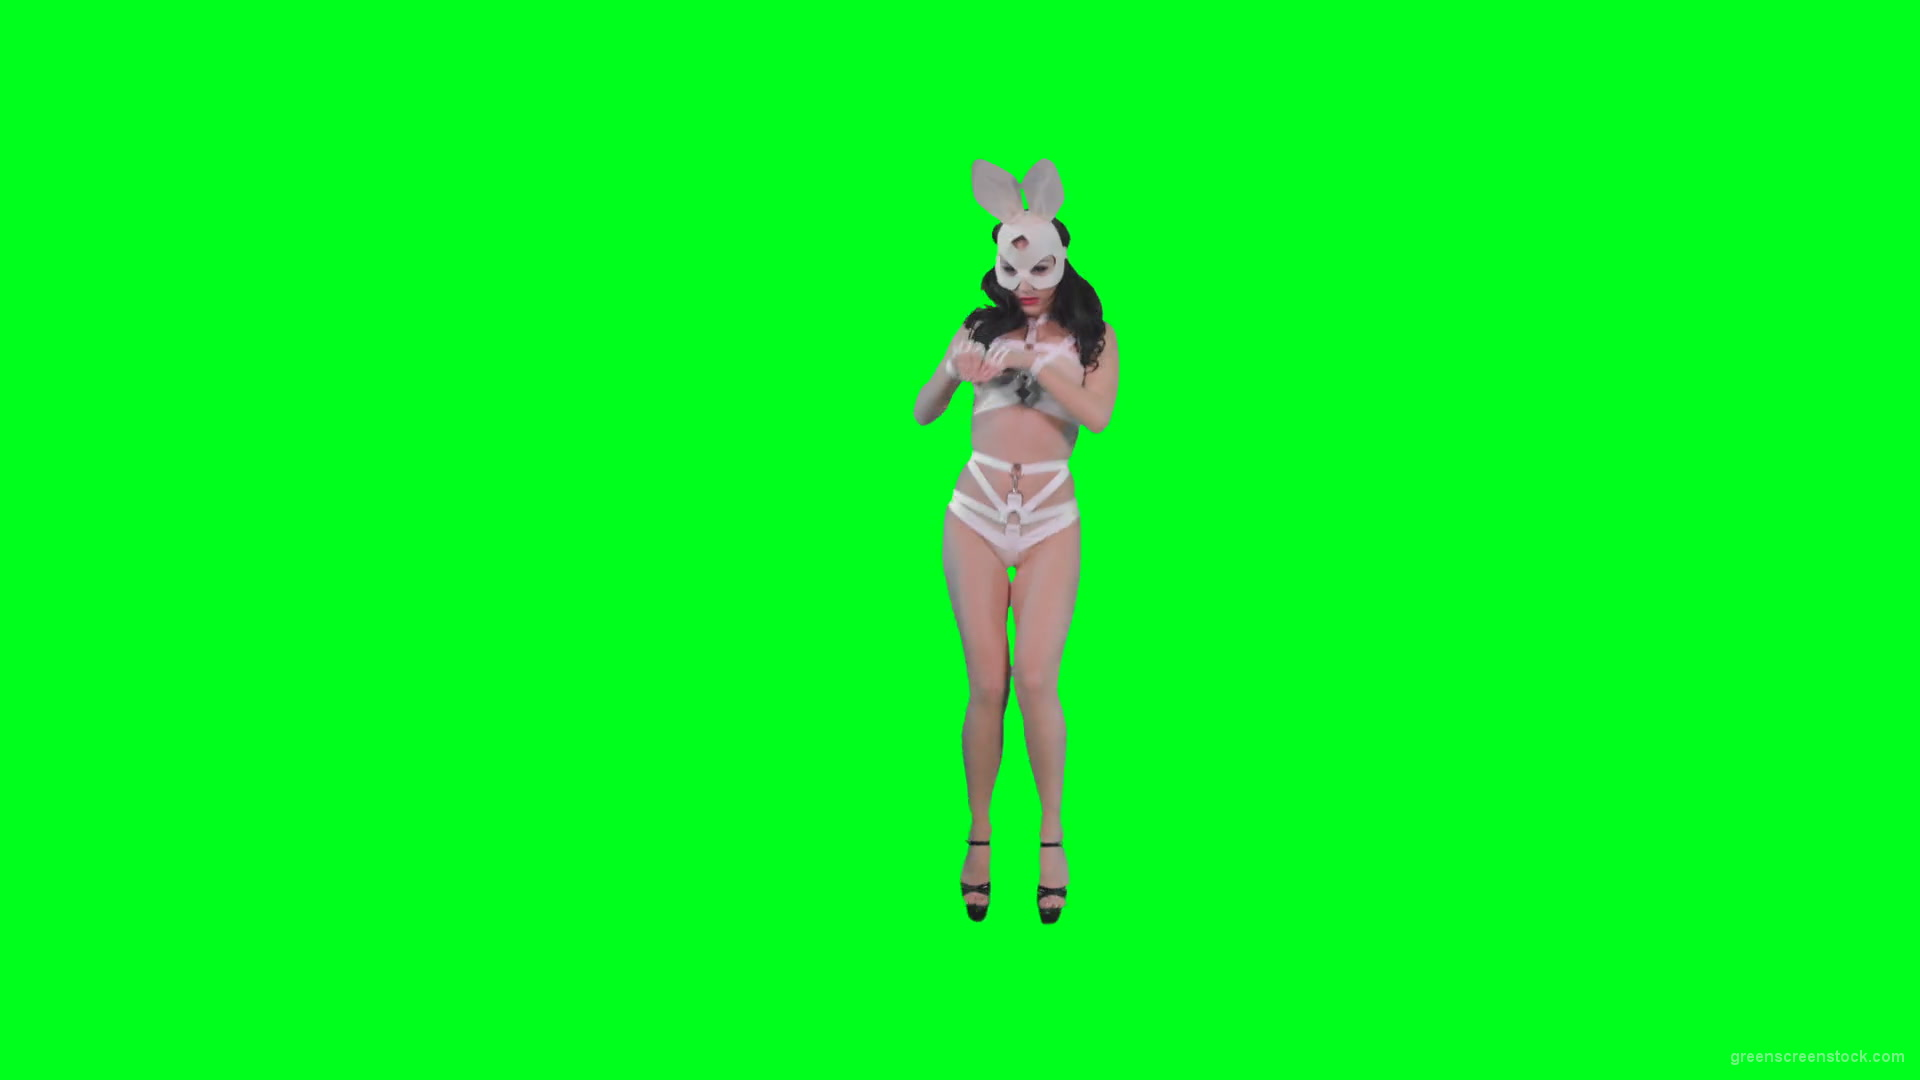 Young-girl-in-rabbit-costume-jumping-and-spinning-on-green-screen-4K-Video-Footage-1920_009 Green Screen Stock